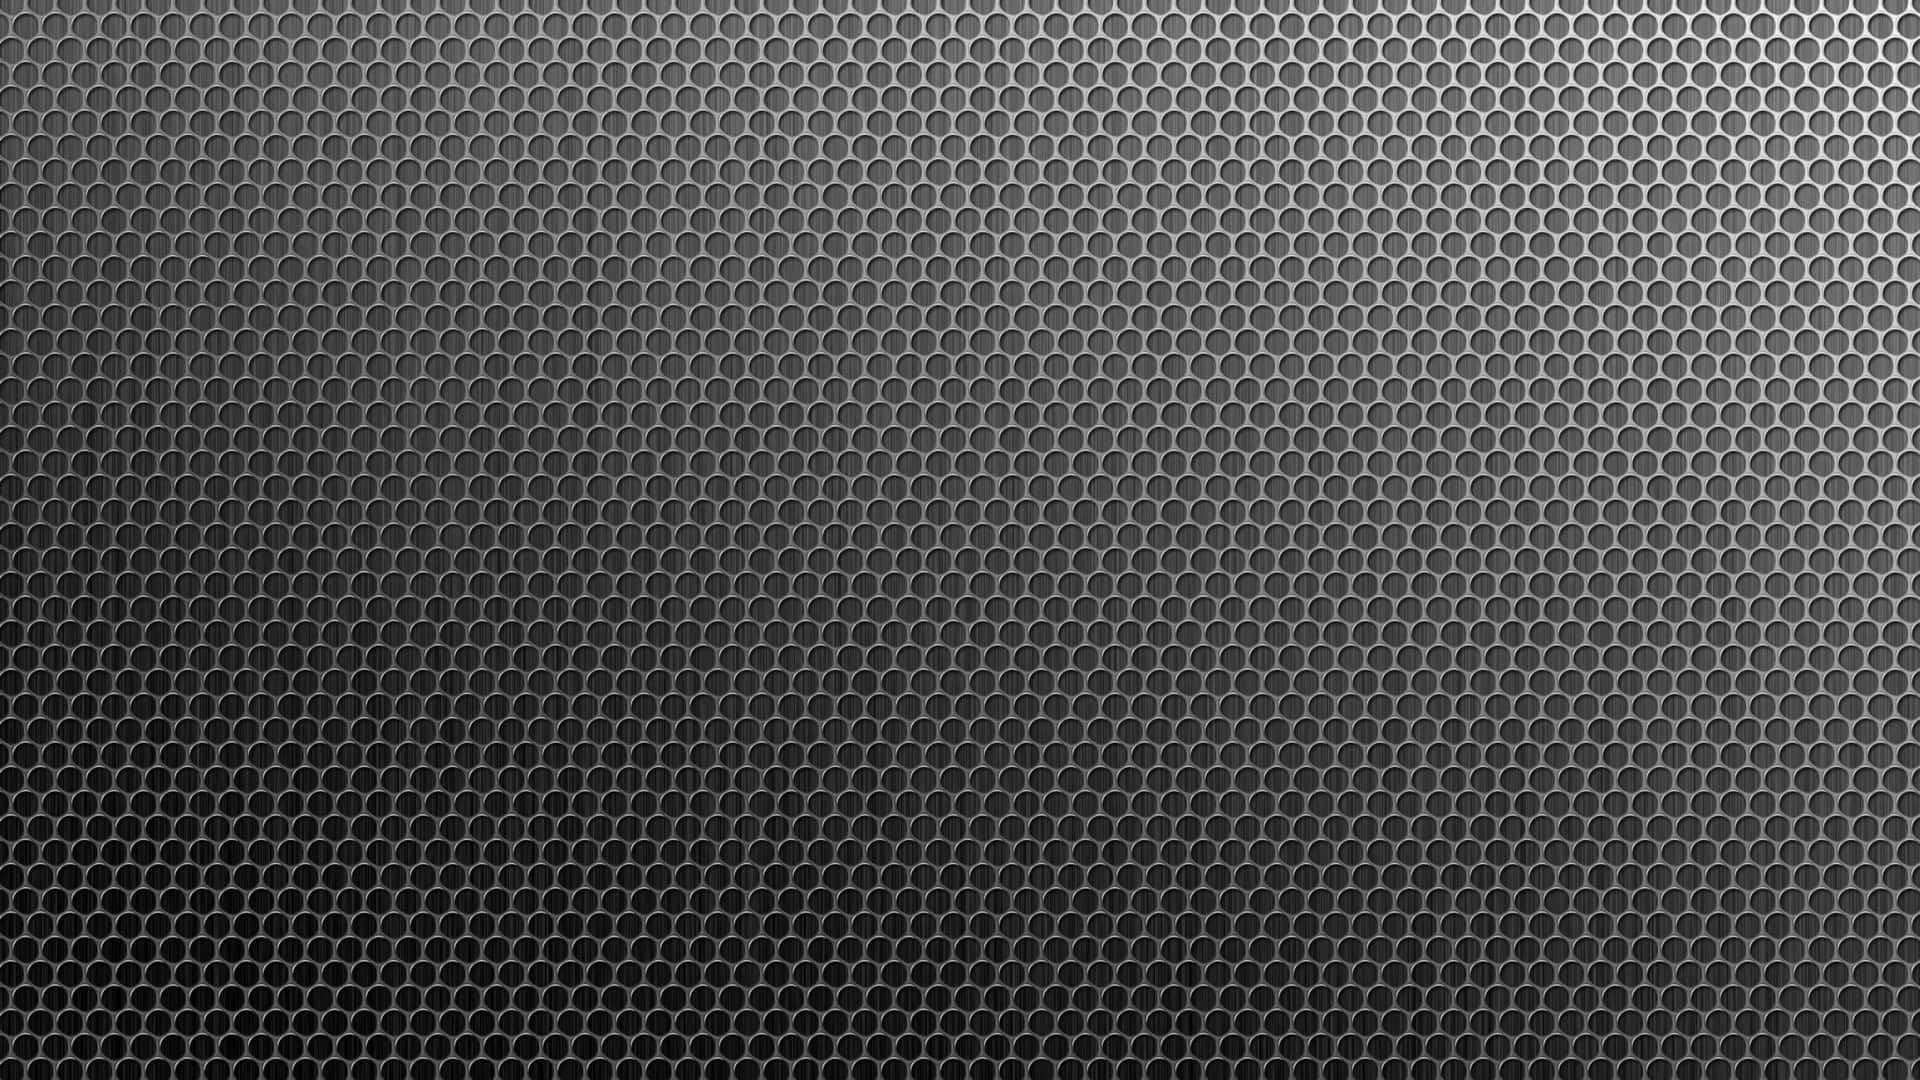 A Black Background With A Pattern Of Hexagons Wallpaper